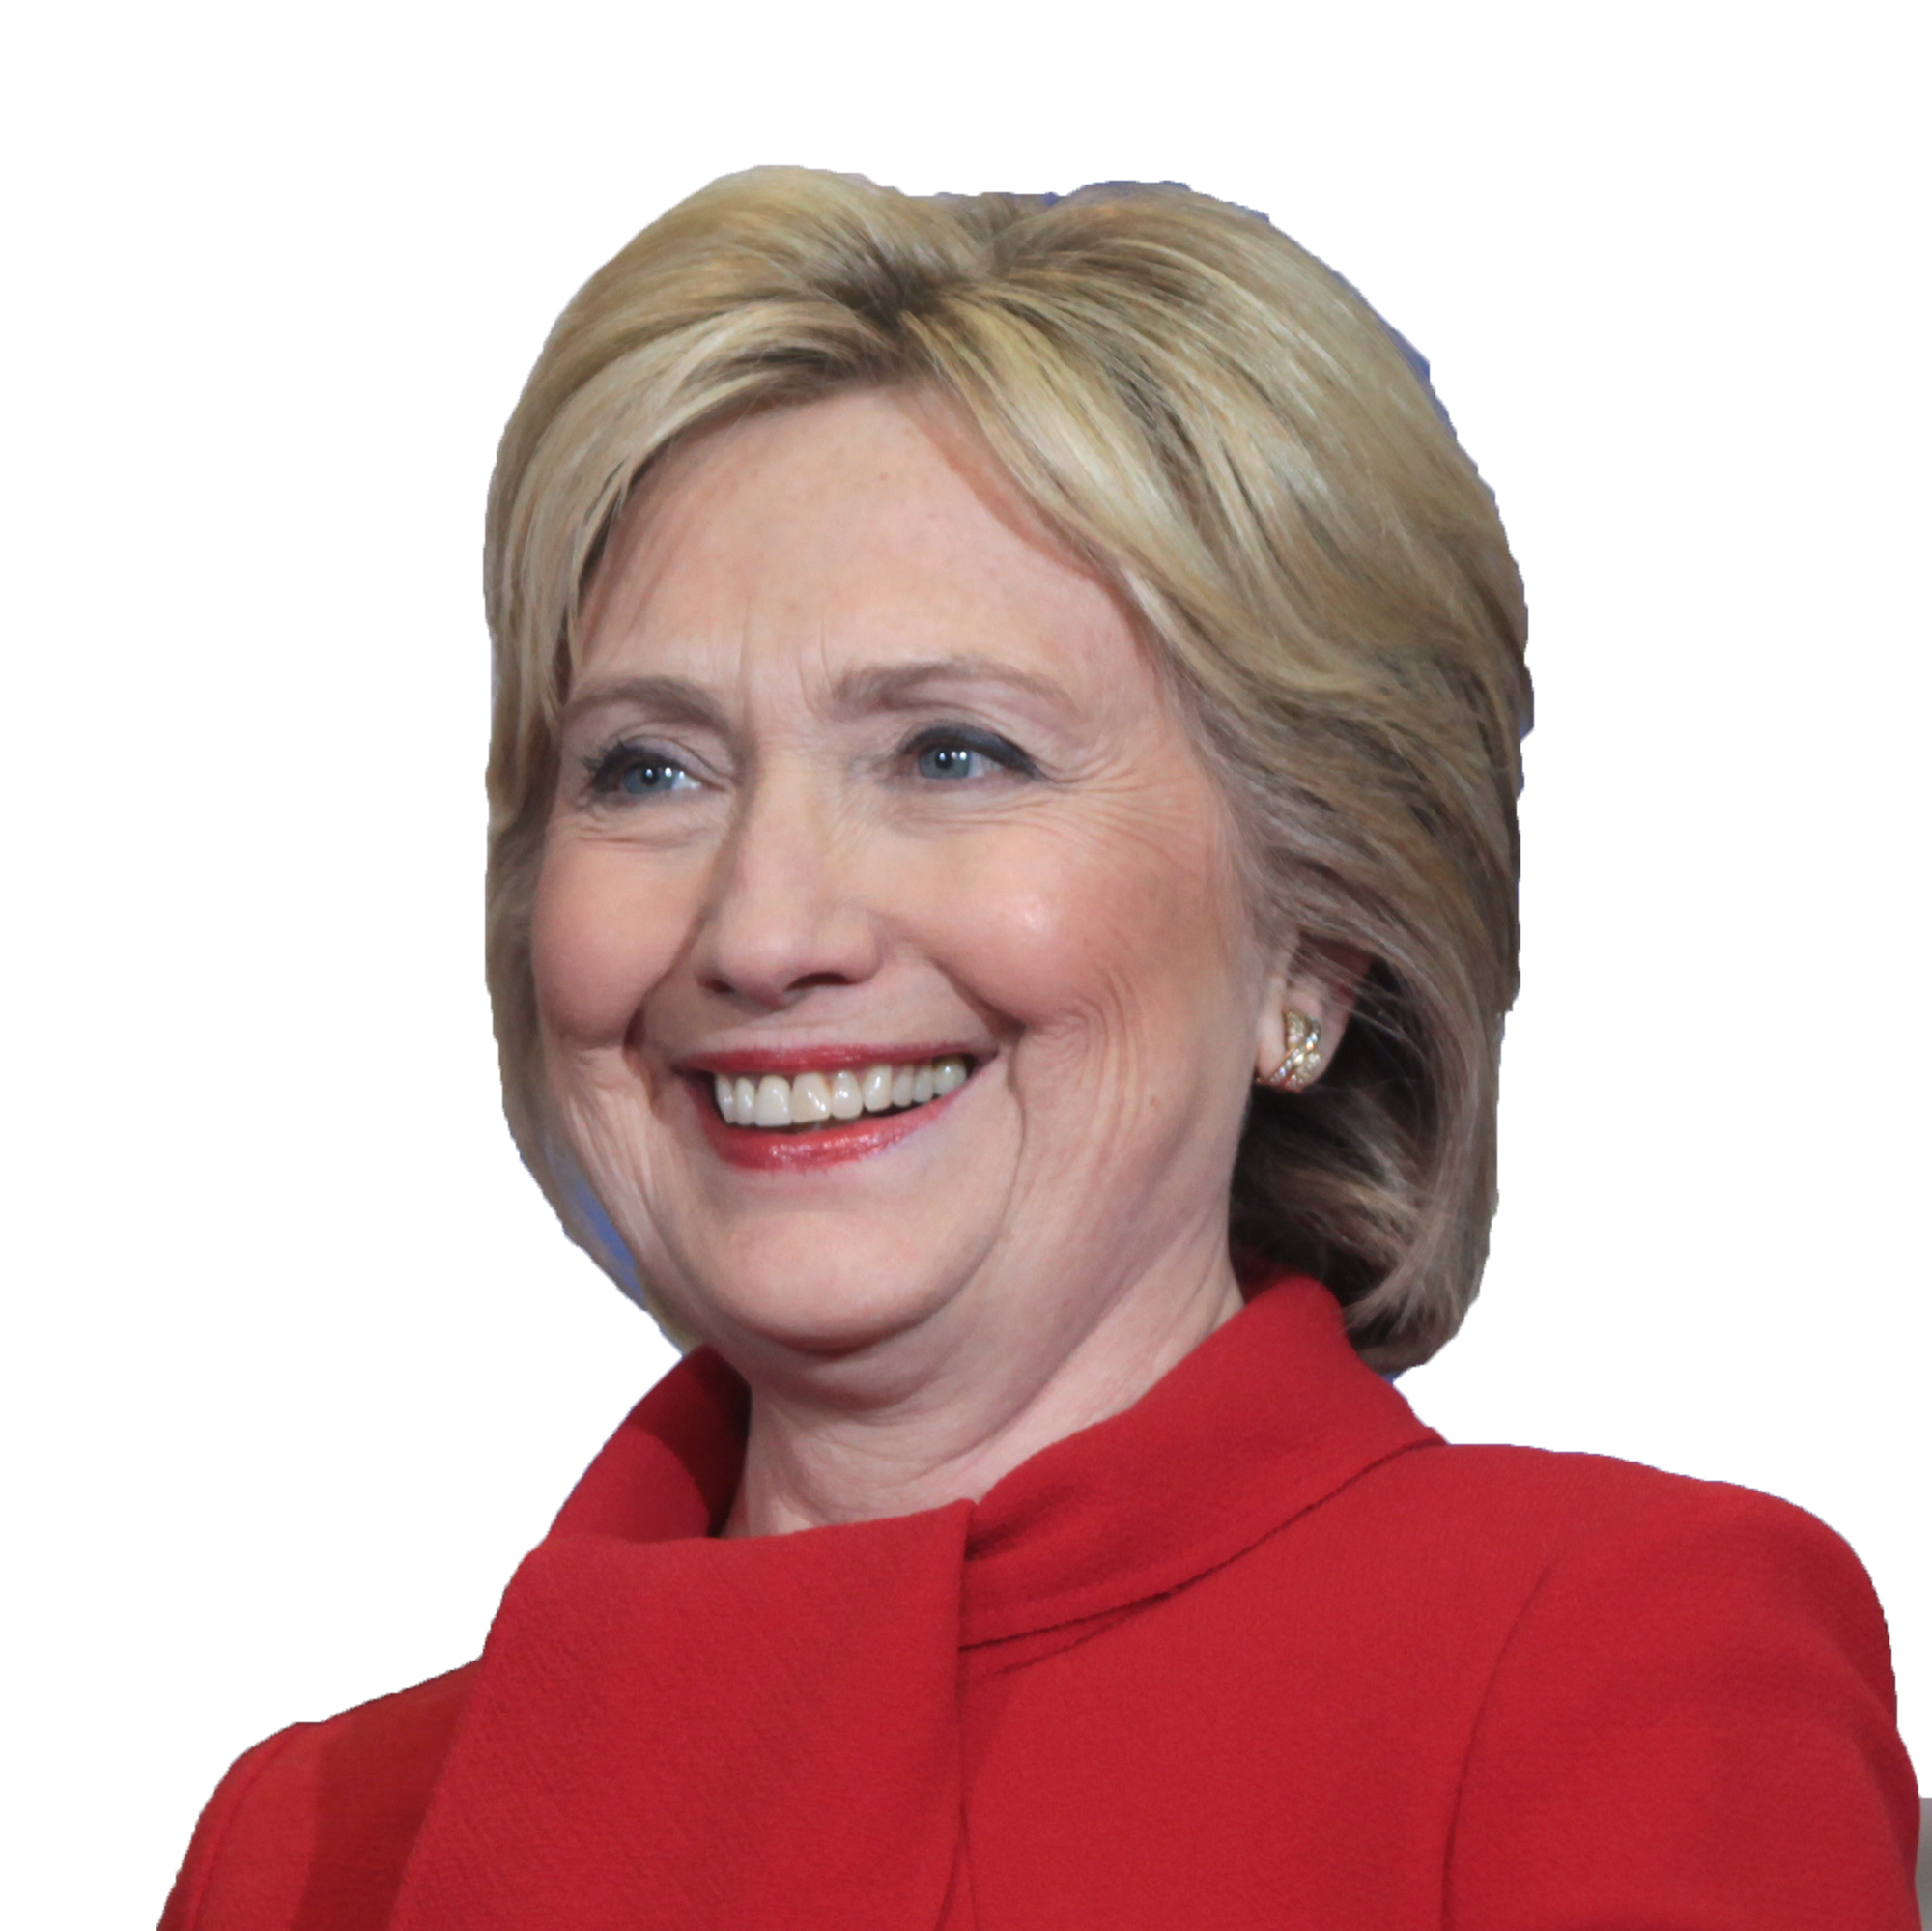 Download PNG image - Smiling Hillary Clinton PNG Image 